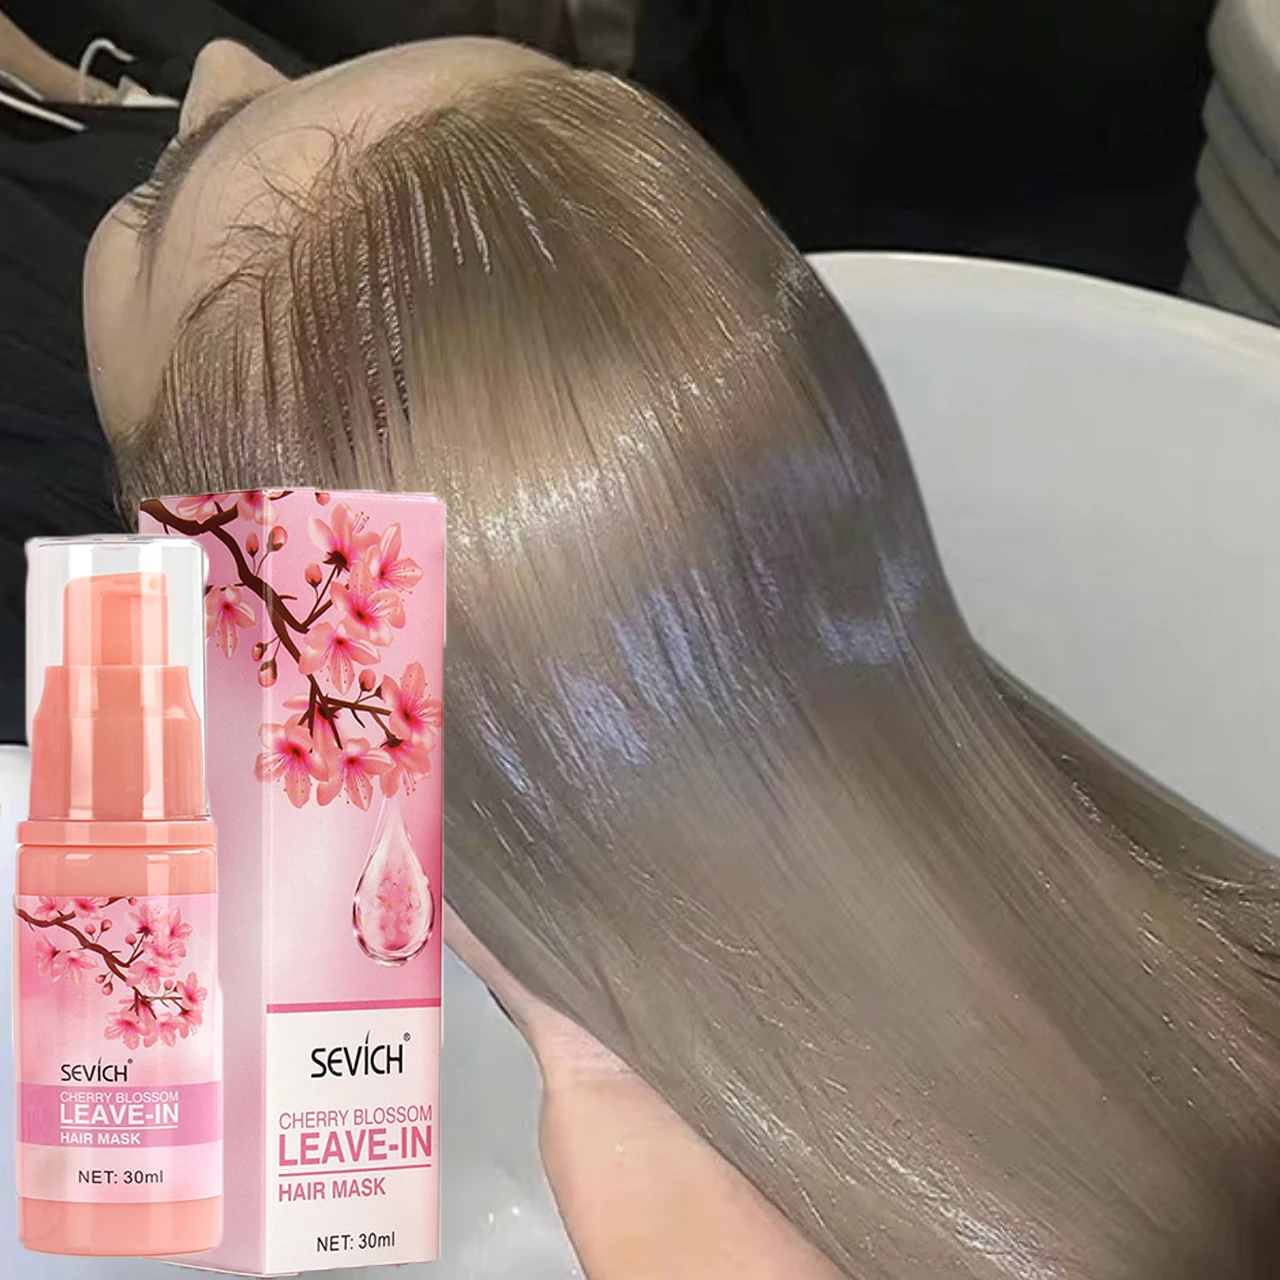 

Sevich 30ml Smoothes Cherry Blossom Leave-in Hair Mask Amino Acid Hair Care Mask Help Repair Damaged Hair Nourishing Hair Mask